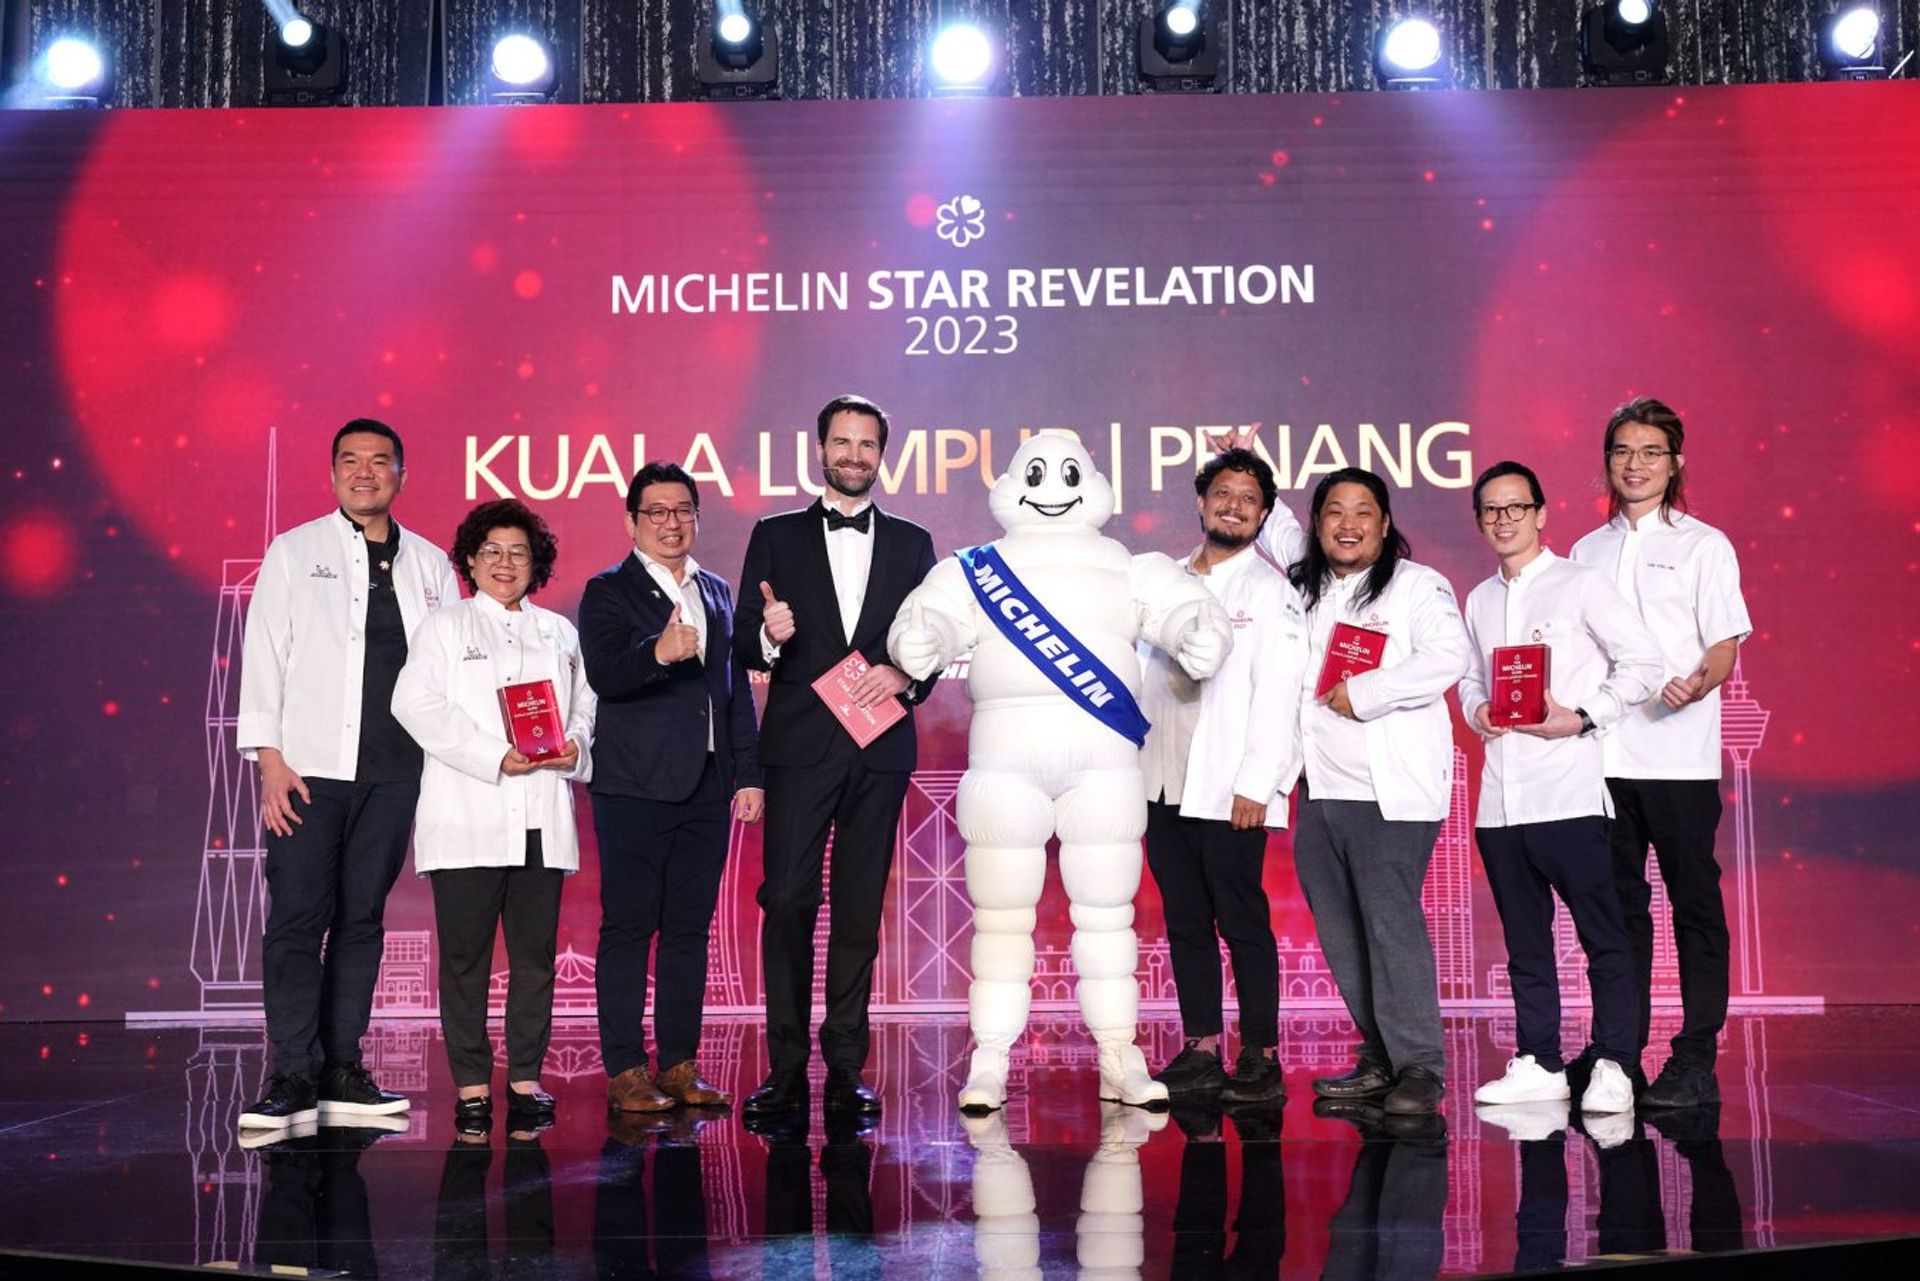 The four restaurants to receive a MICHELIN Star in the inaugural MICHELIN Guide Kuala Lumpur & Penang are DC. by Darren Chin, Auntie Gaik Lean’s Old School Eatery, Dewakan, and Au Jardin. (Photo: MICHELIN Guide)